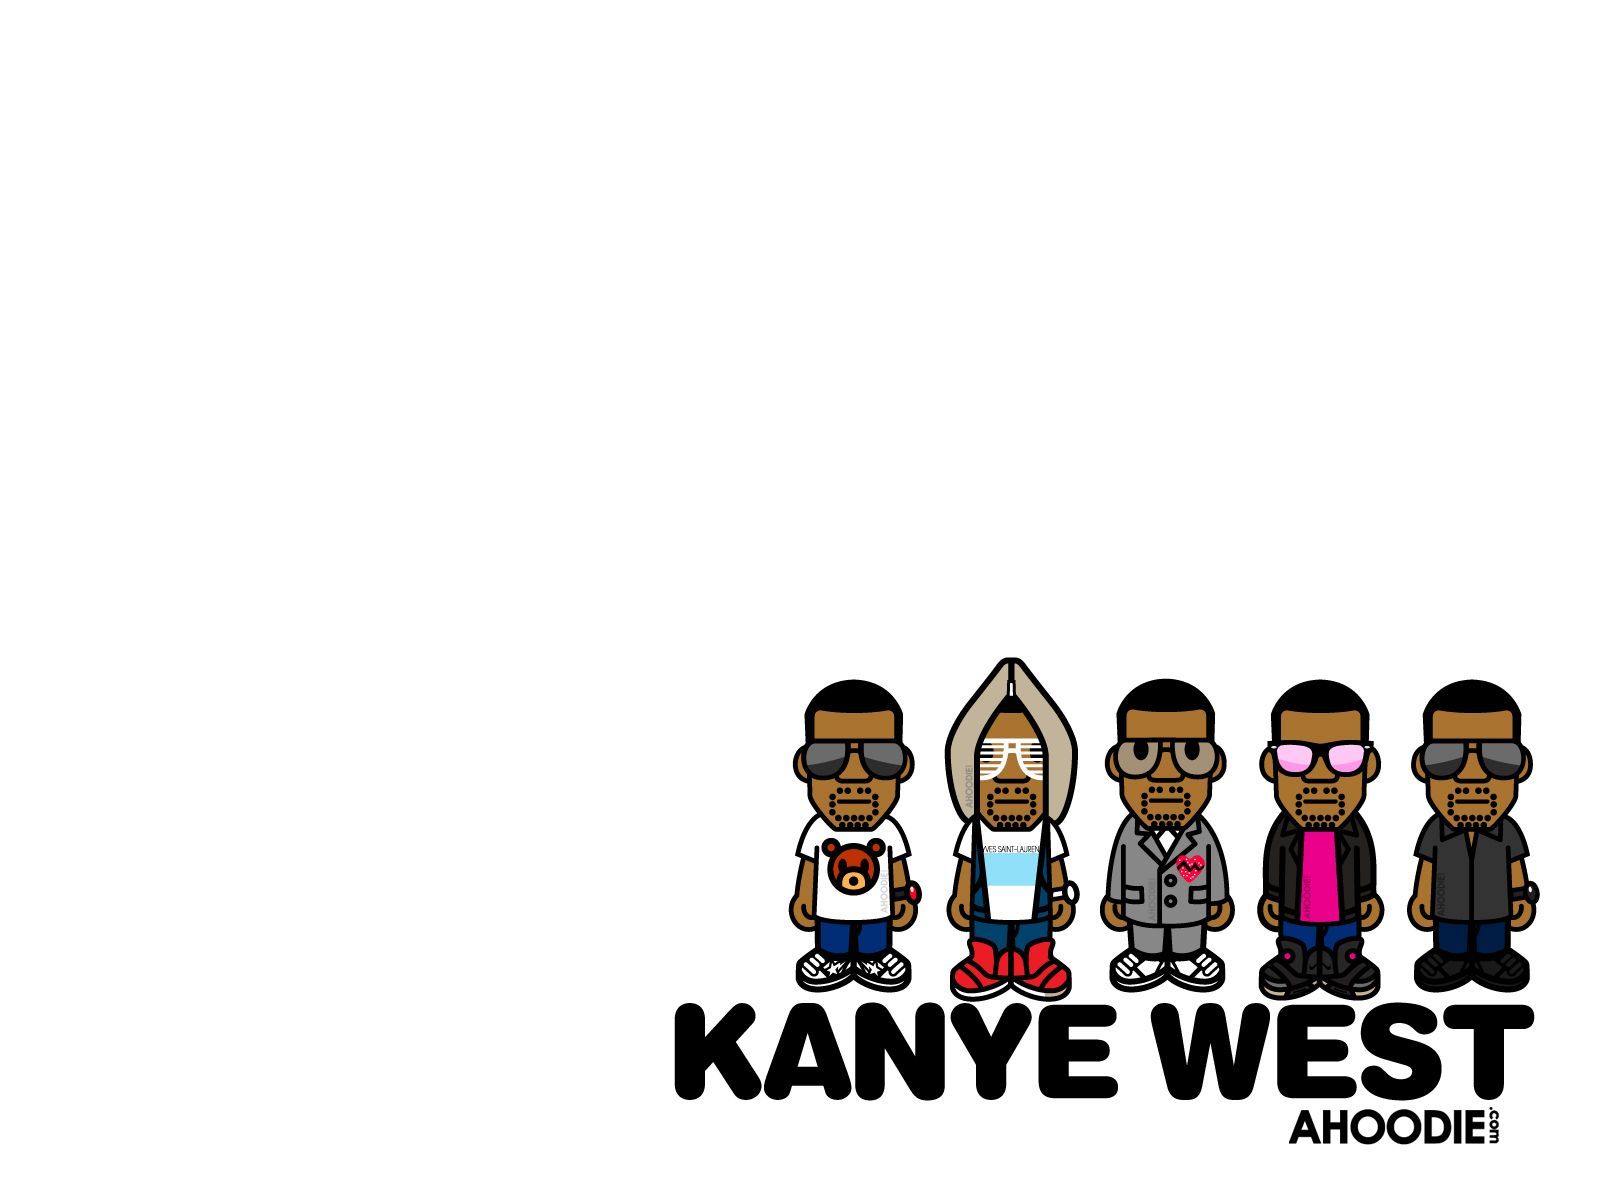 CHICKEN & WAFFLES: Ahoodie.com; Kanye West Wallpapers *DOWNLOAD HERE